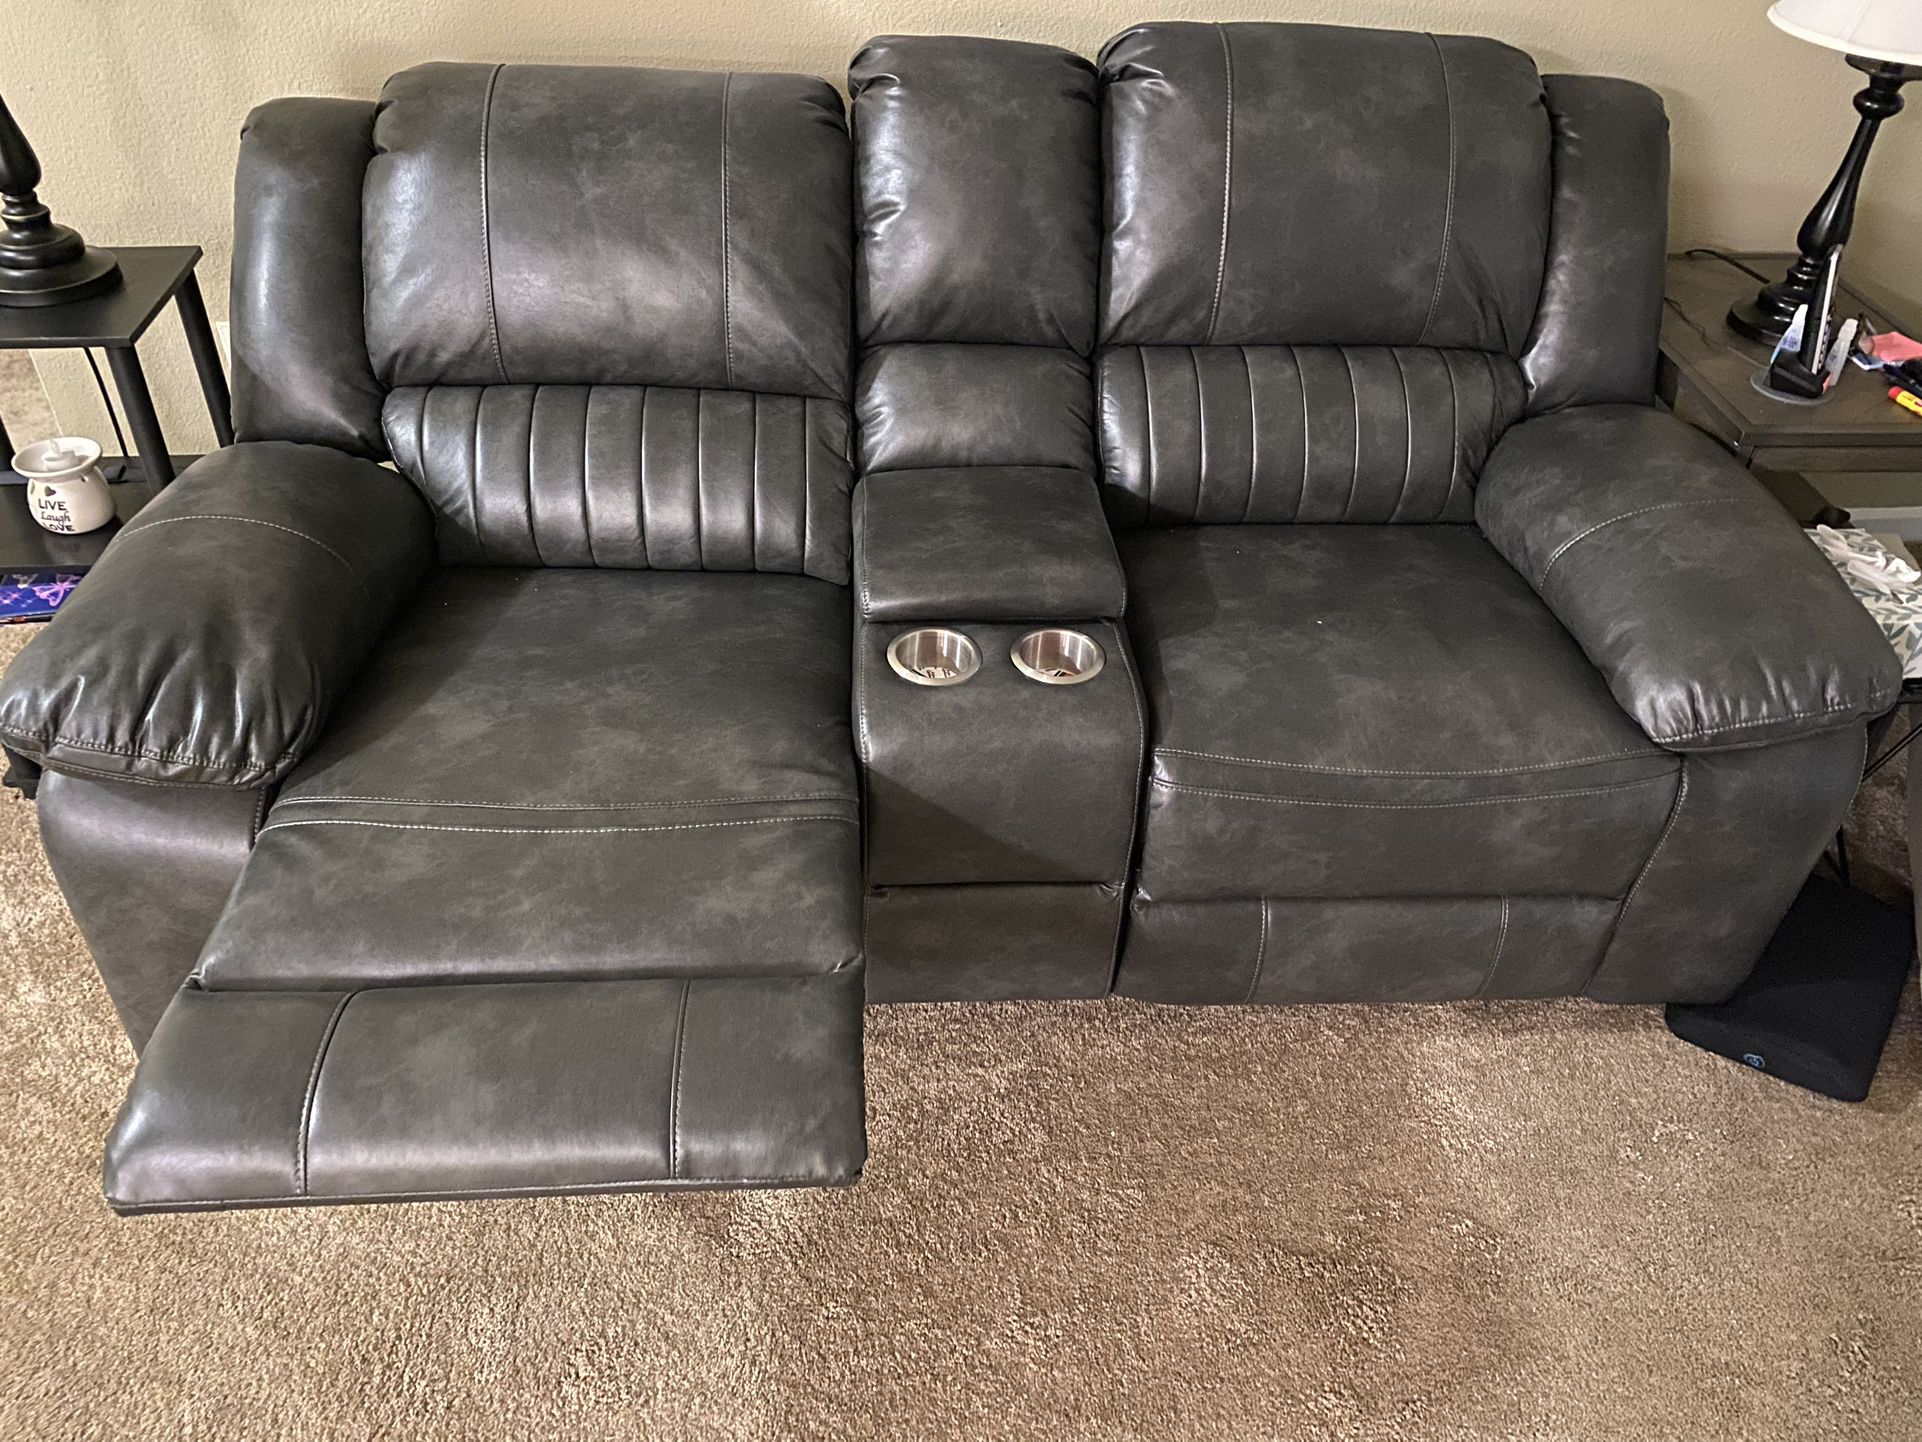 Recliner Couch